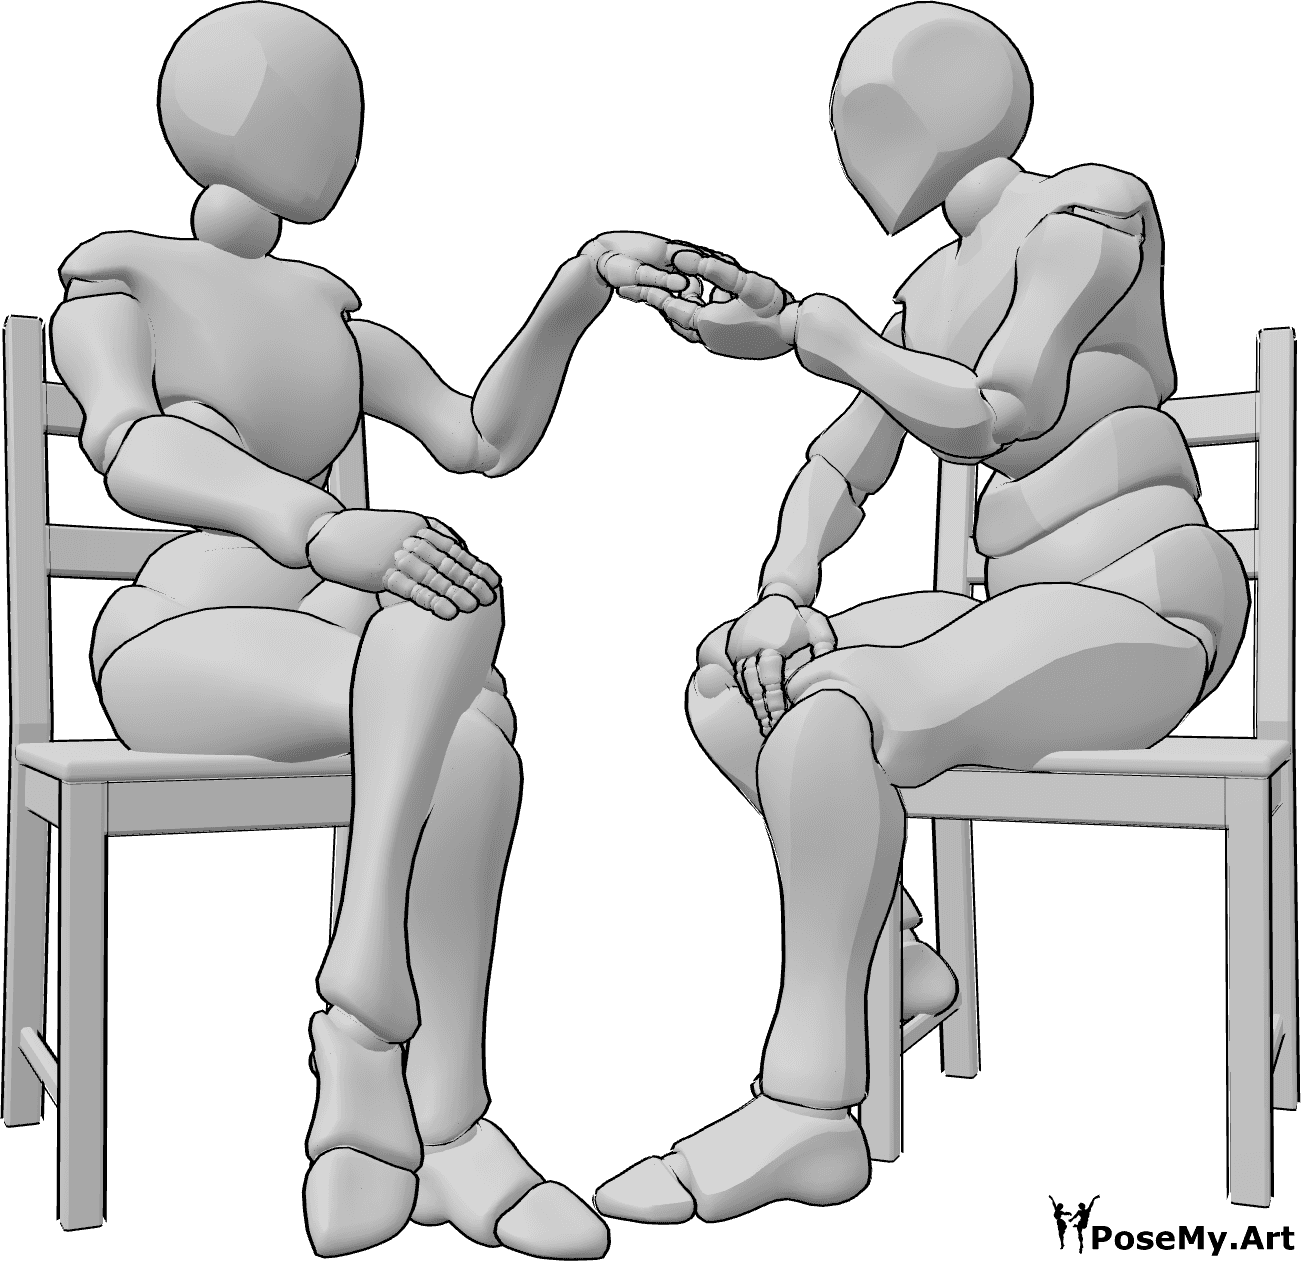 Pose Reference- Kissing hand pose - Female and male are sitting on chairs, the male is about to kiss the female's hand